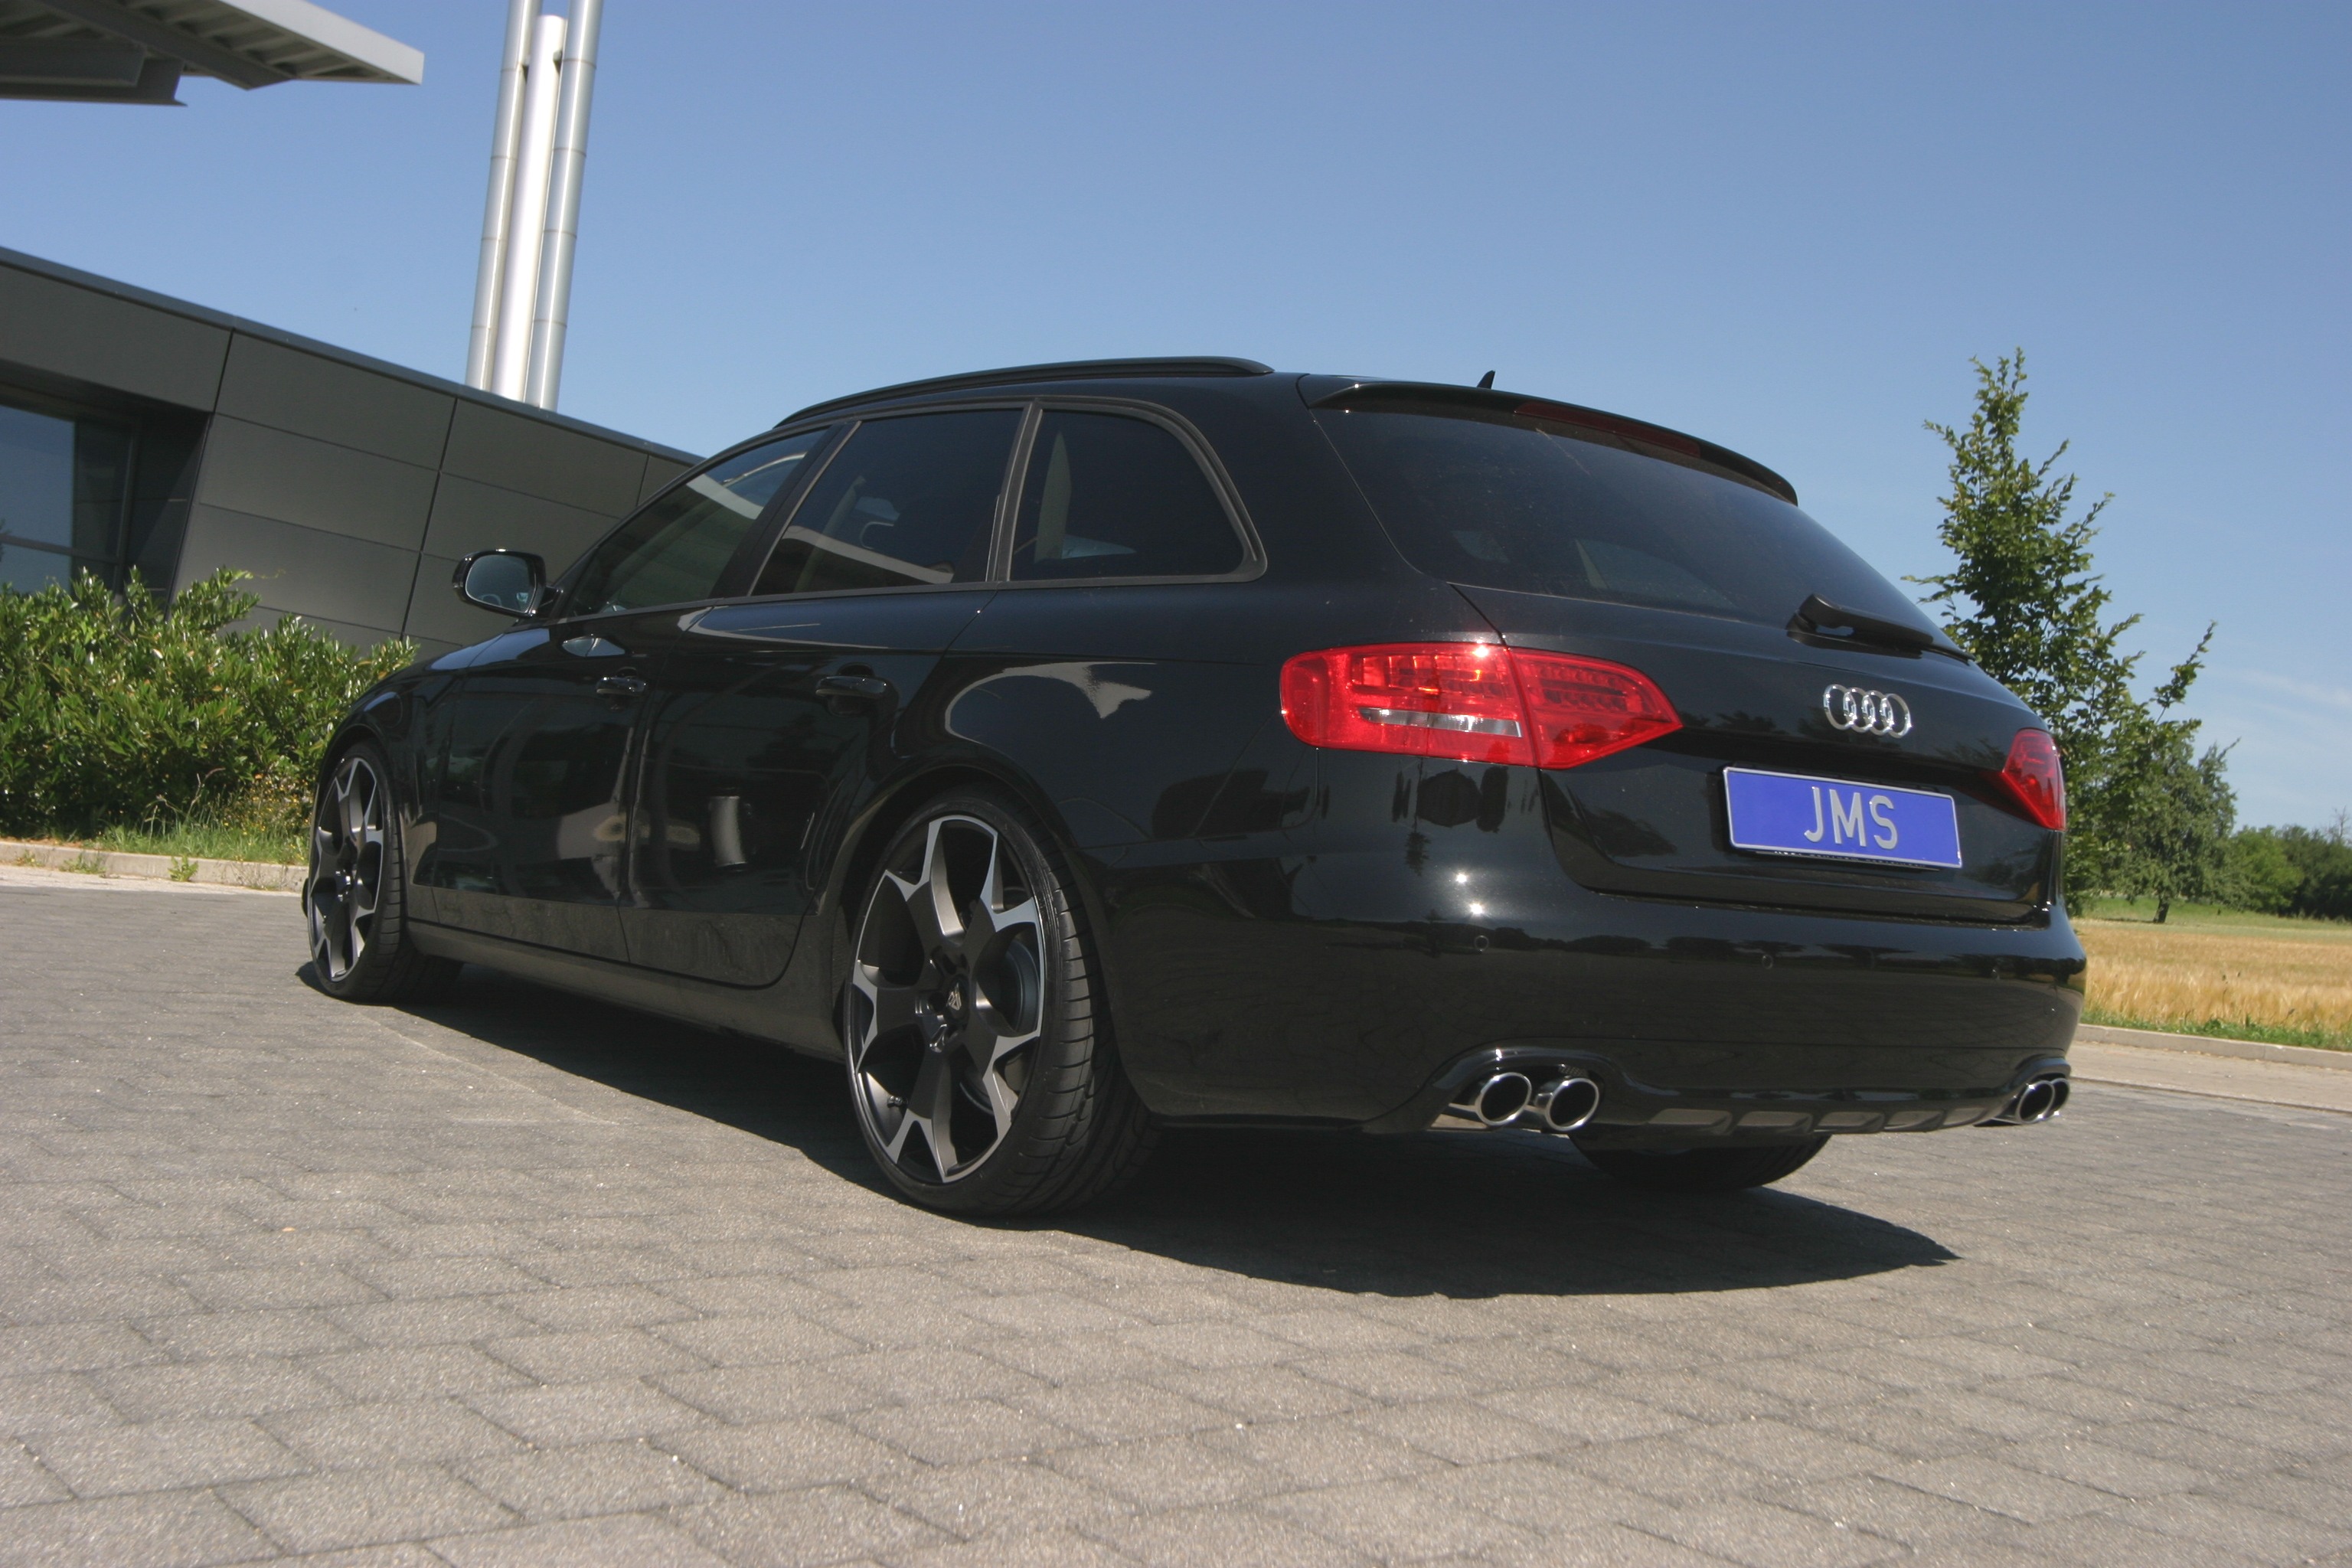 Audi A4 B8 tuning from jms with 20 inch aluminum ghost wheels, JMS